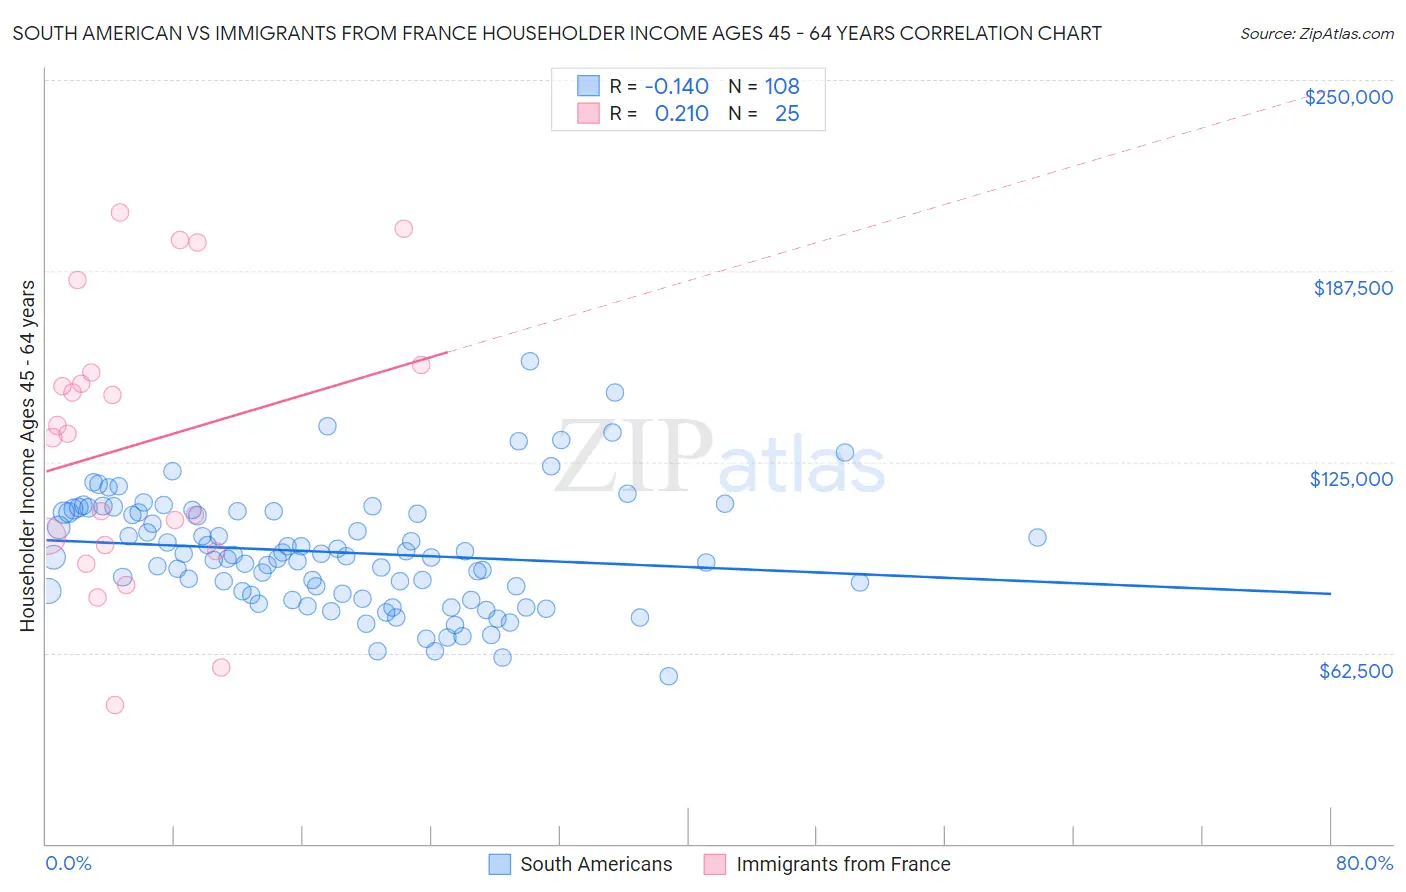 South American vs Immigrants from France Householder Income Ages 45 - 64 years